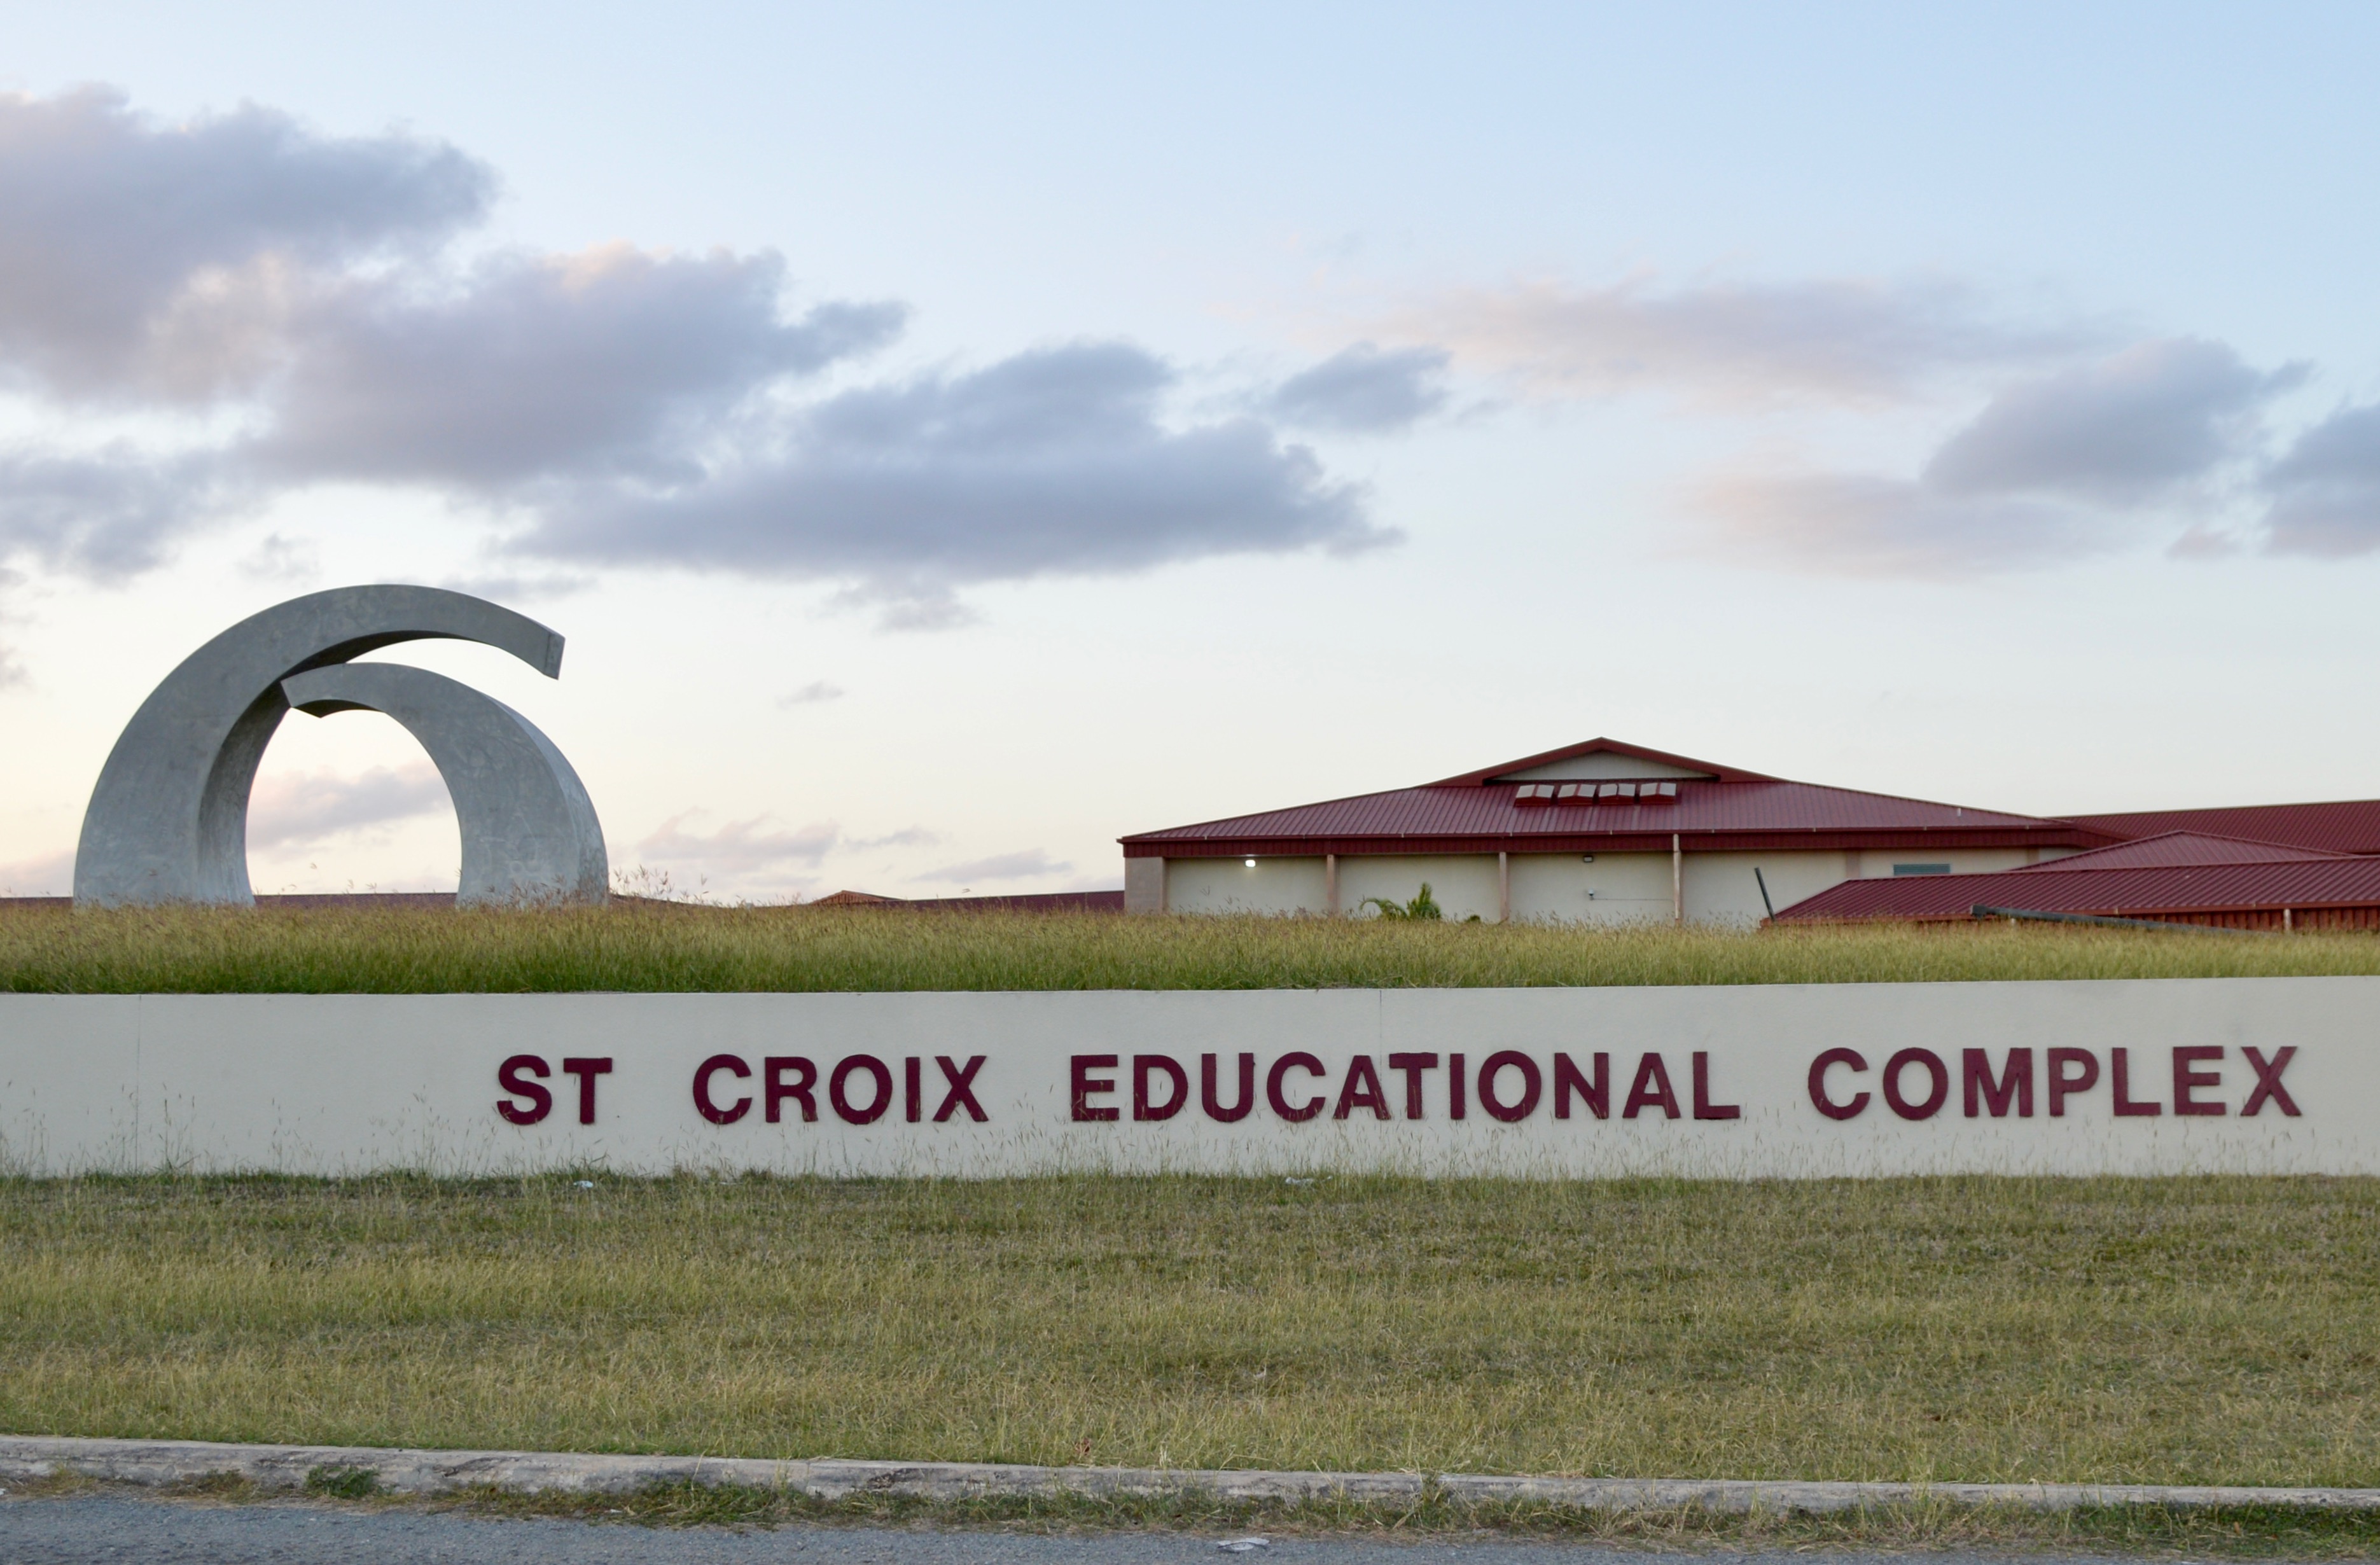 The battery project at the St. Croix Educational Complex will supply electricity to the planned shelter to run critical functions such as lighting, refrigeration and air conditioning. (Source file photo)